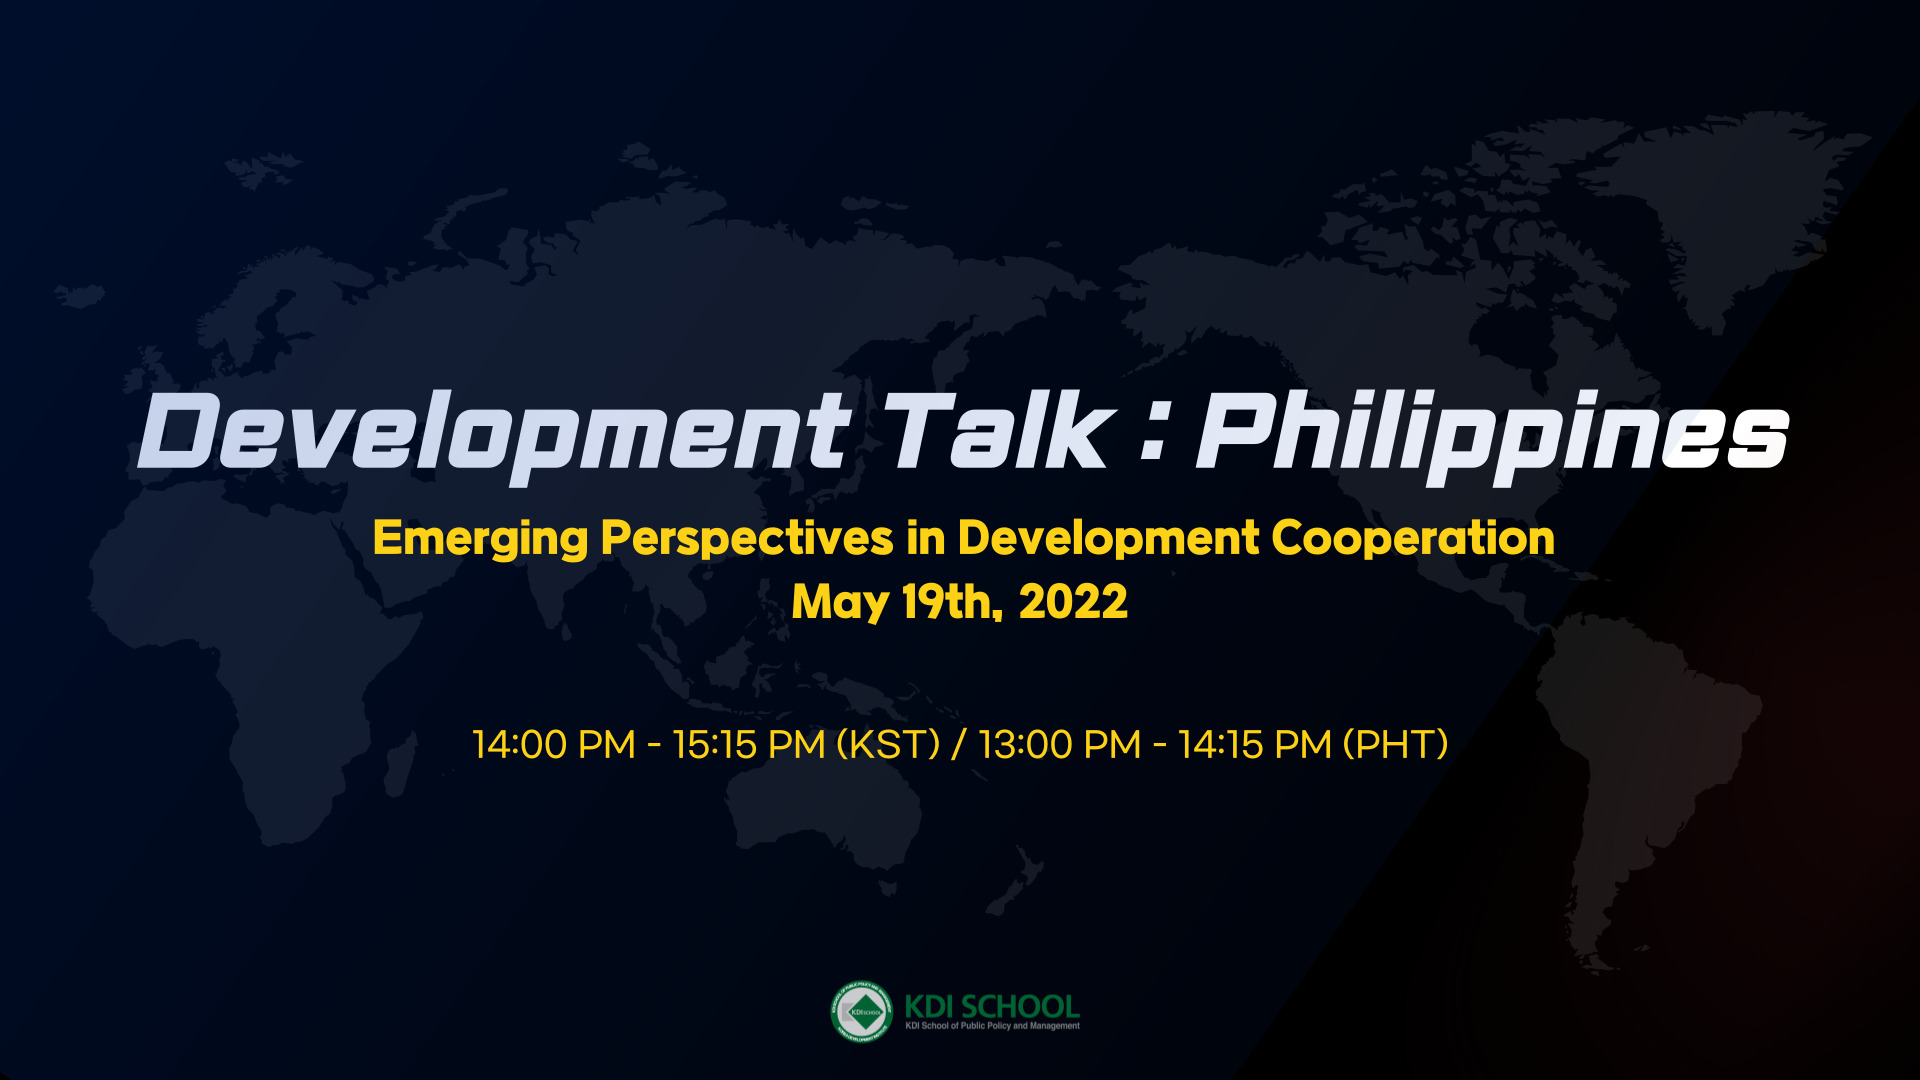 [RSVP] Invitation to the 2022 Development Talks Series (2): Philippines (May 19, Thursday @ 2:00-3:15 pm)